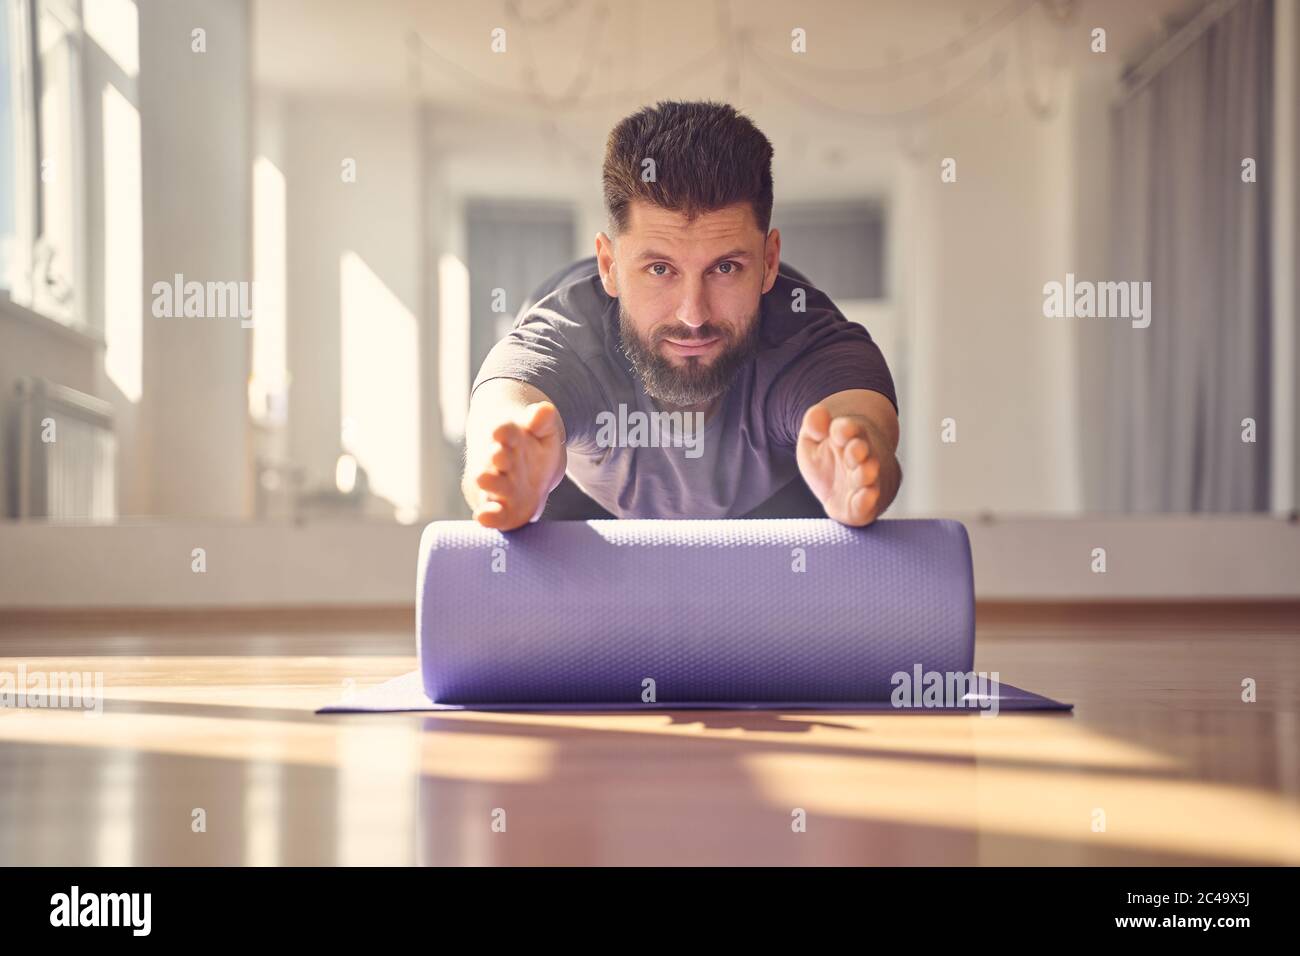 Bearded young man doing exercise with yoga roller block Stock Photo